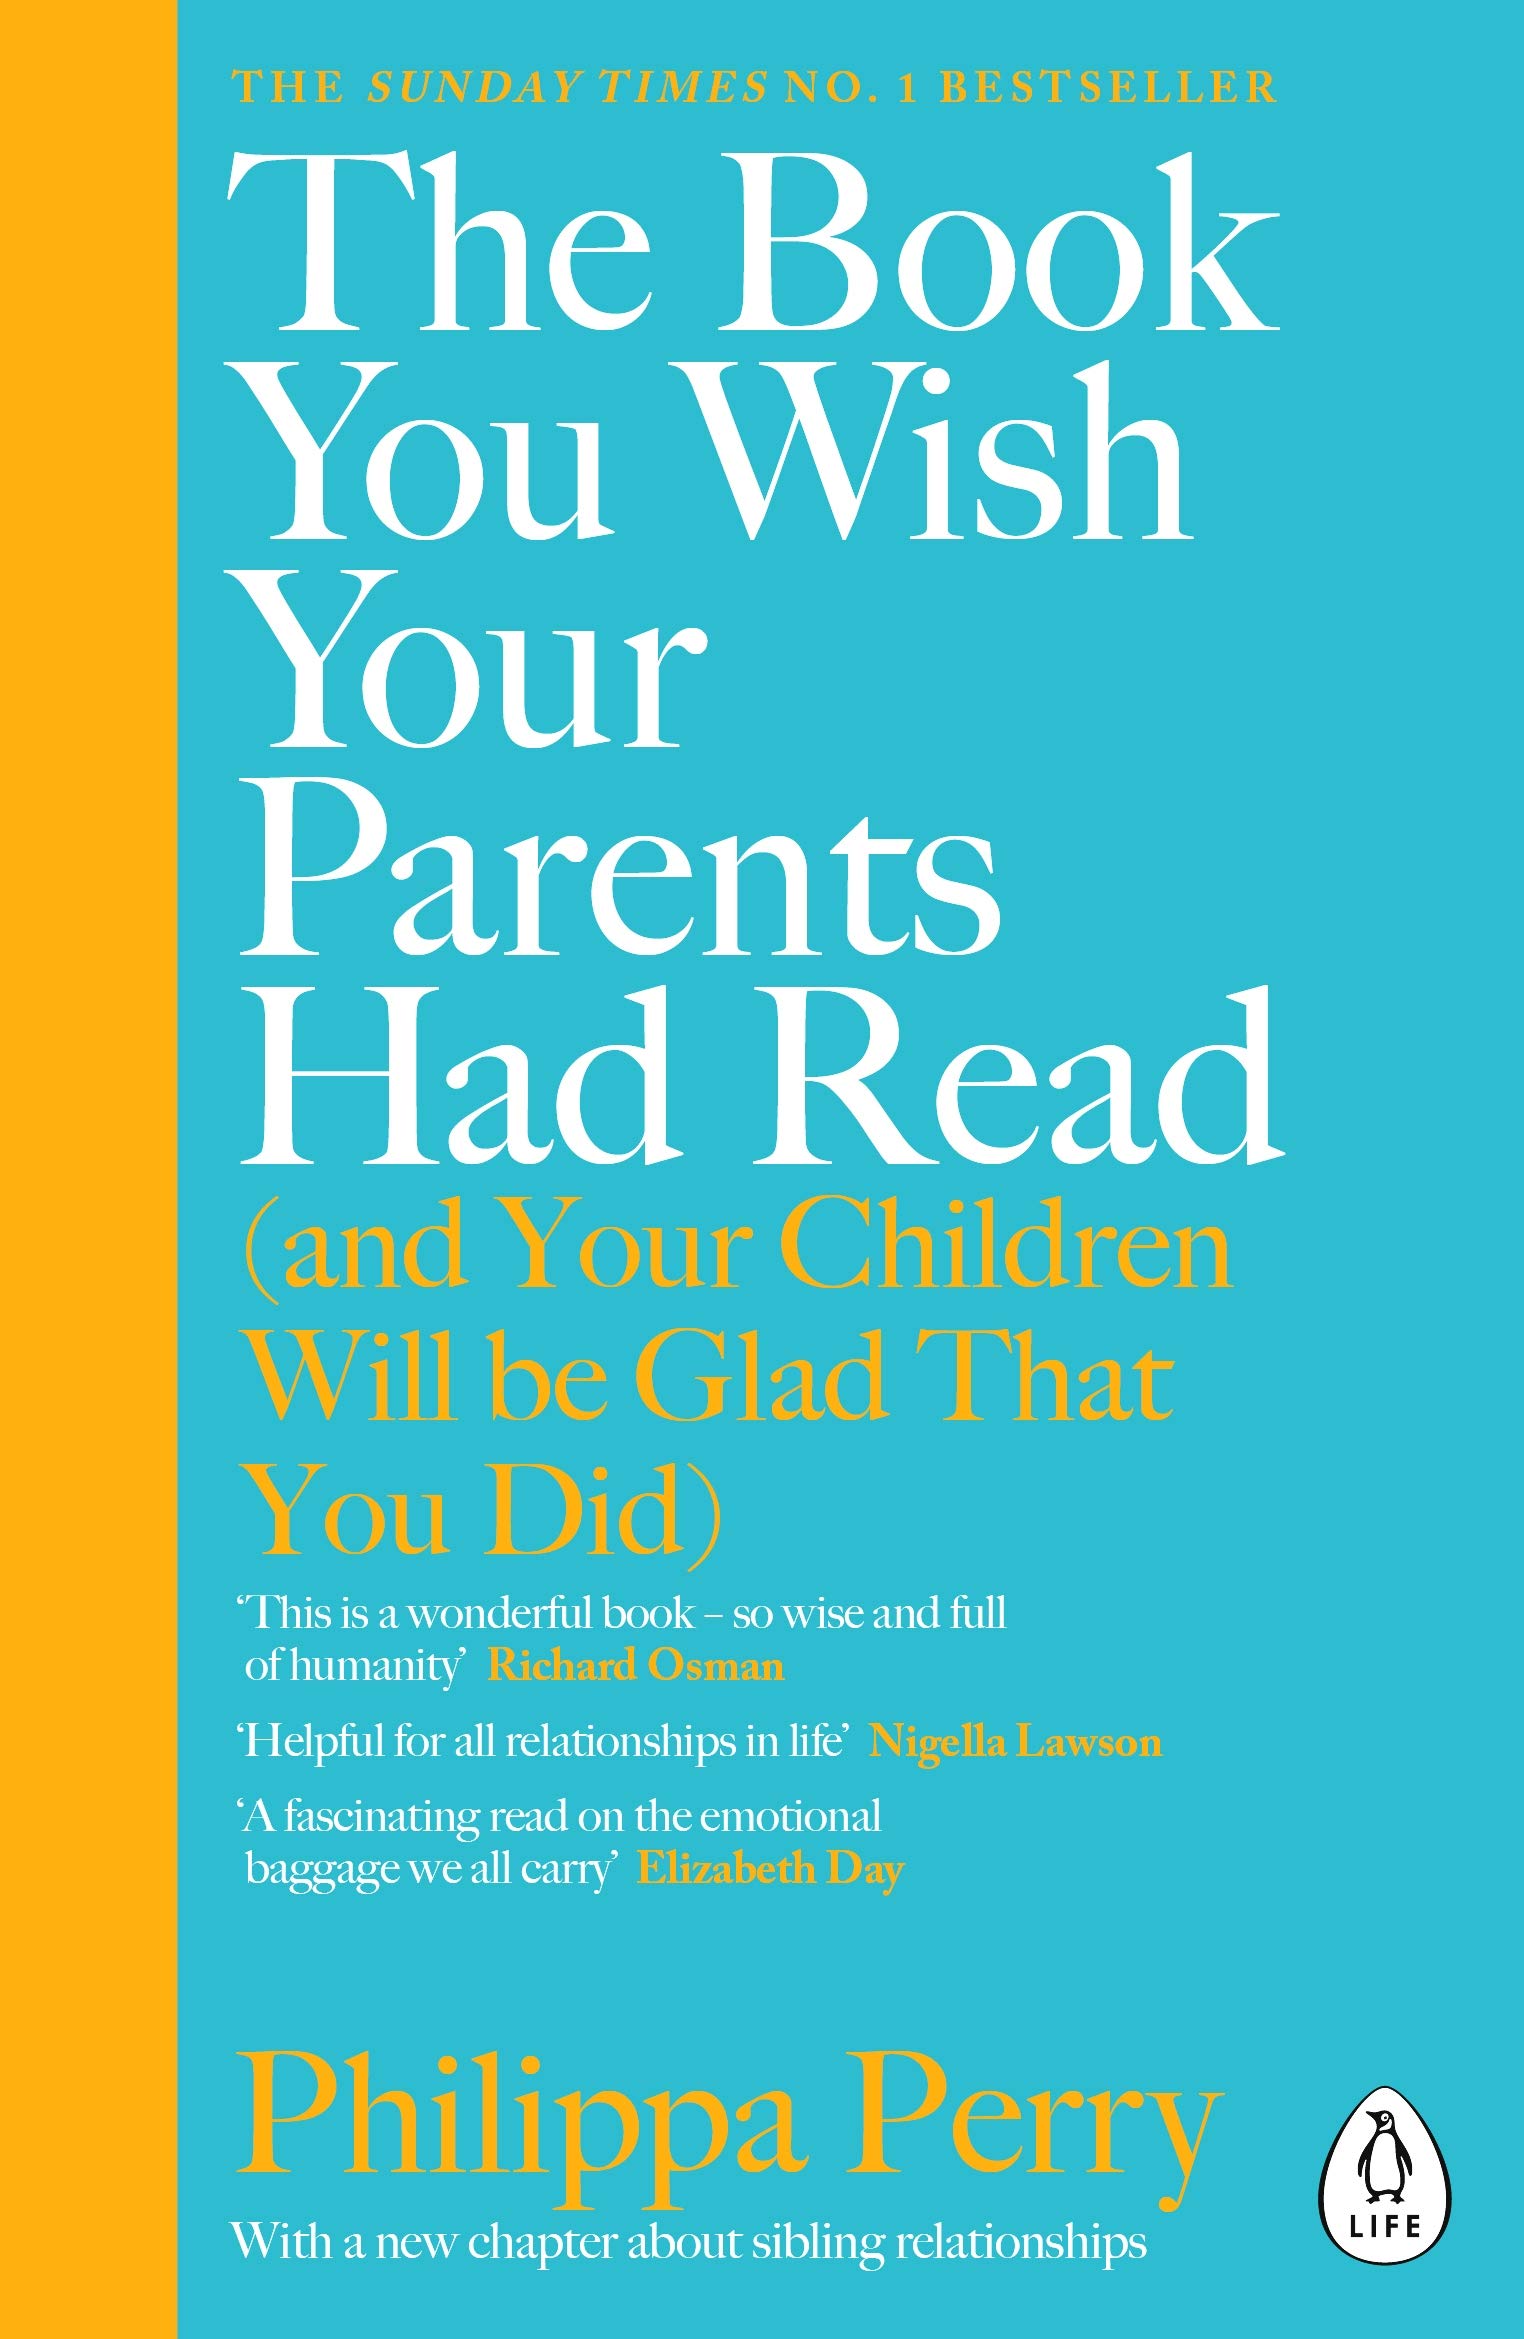 THE BOOK YOU WISH YOUR PARENTS HAD READ (AND YOUR CHILDREN WILL BE GLAD THAT YOU DID) HC